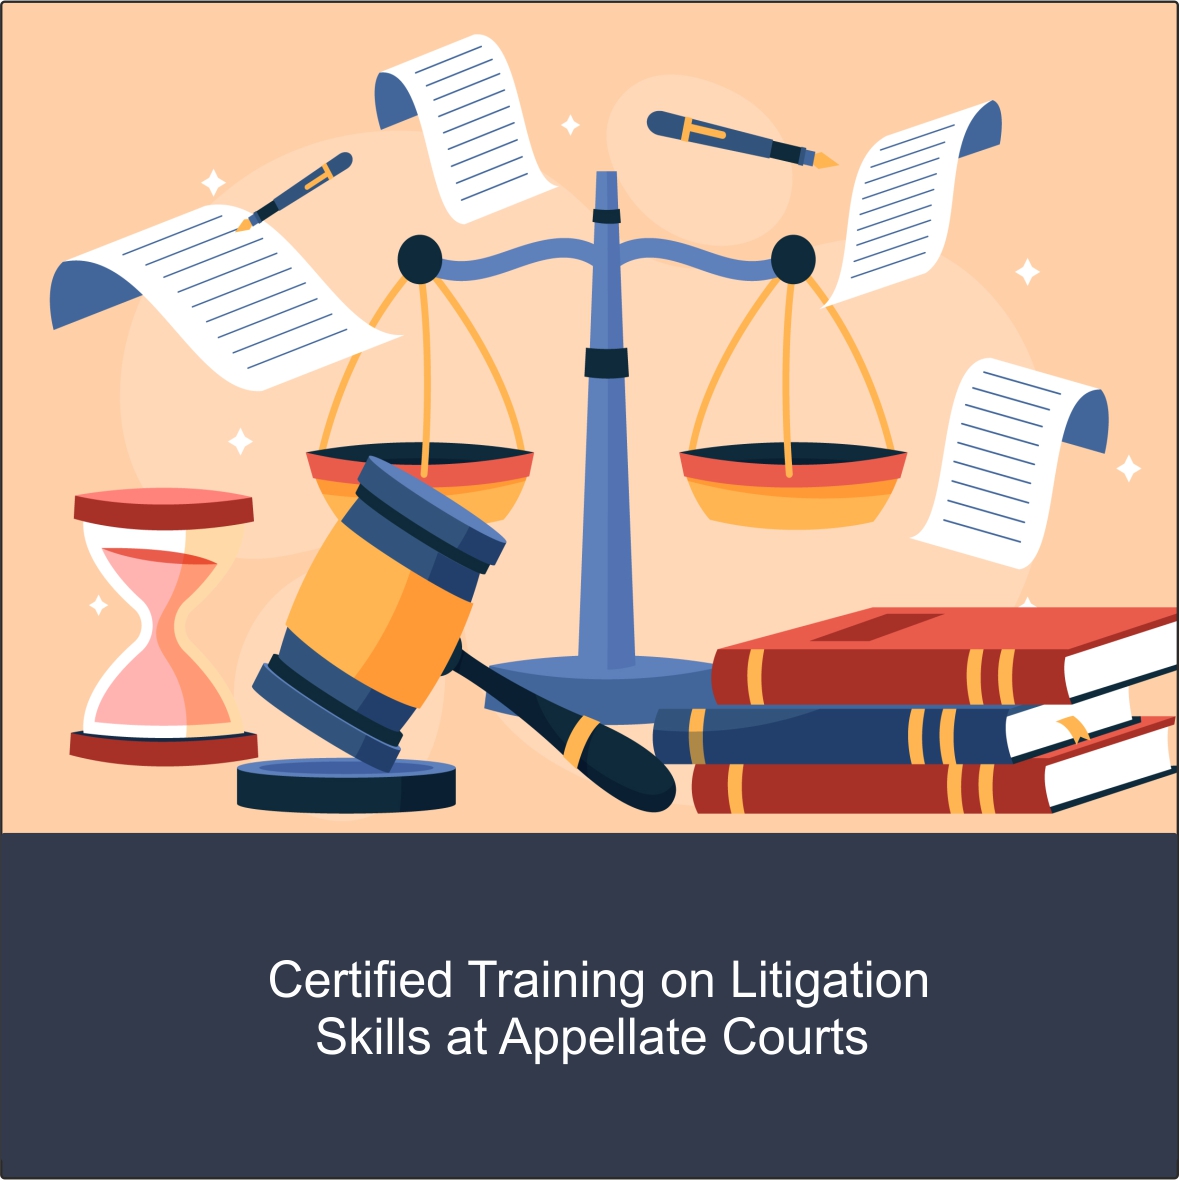 Certified Training on Litigation Skills at Appellate Courts